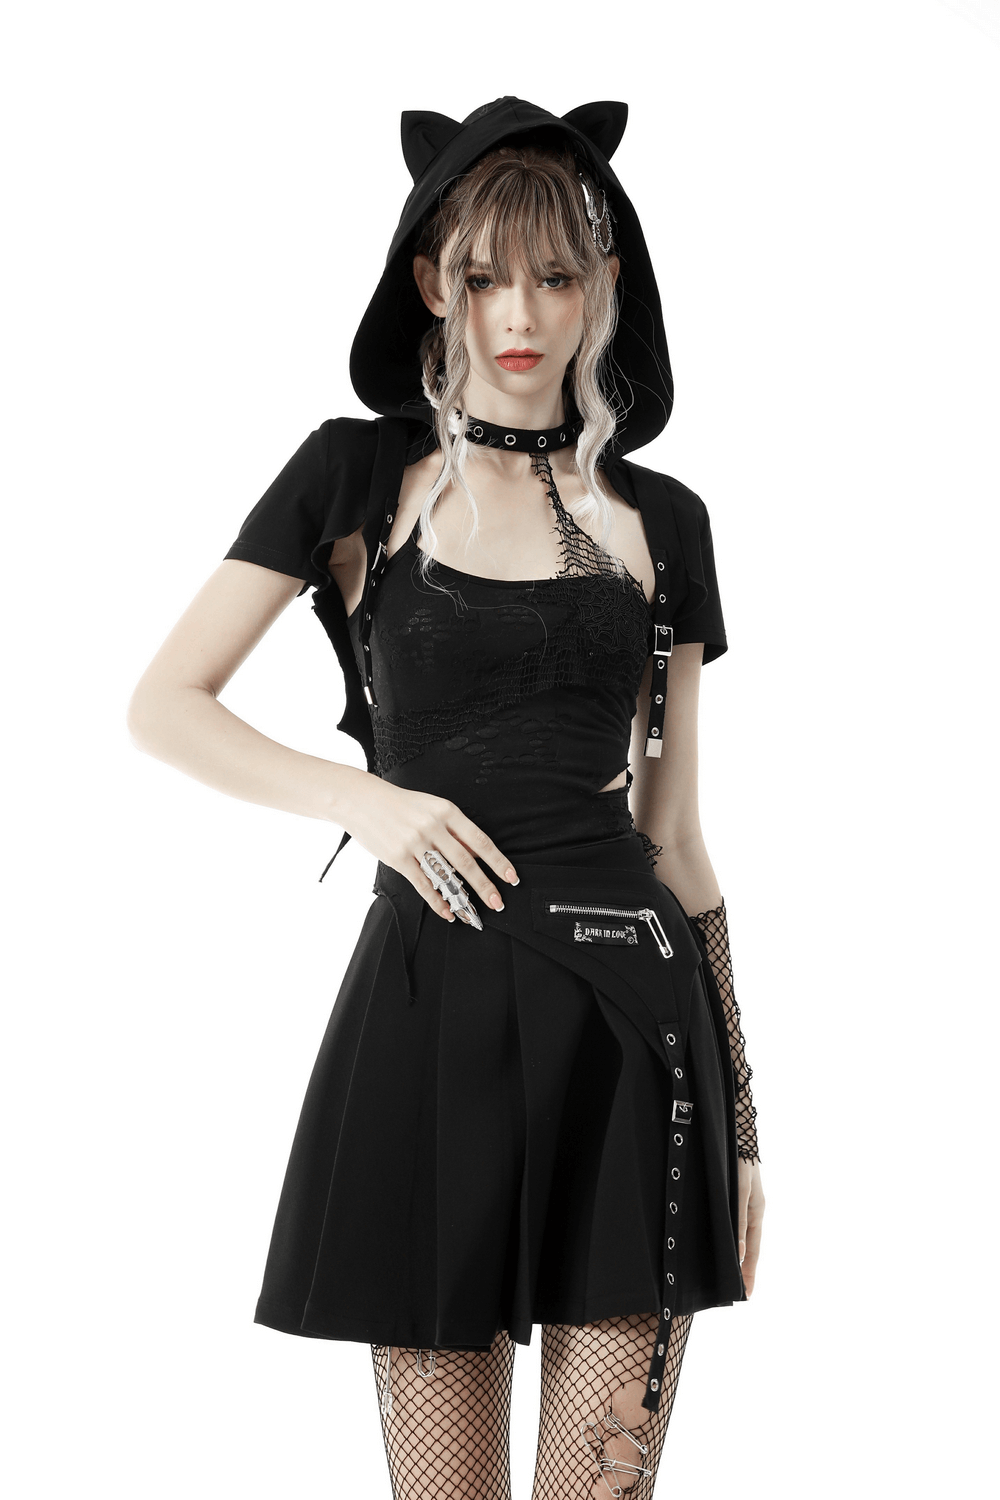 Black Cat Ear Crop Top with Bat Wings and Heart Tail